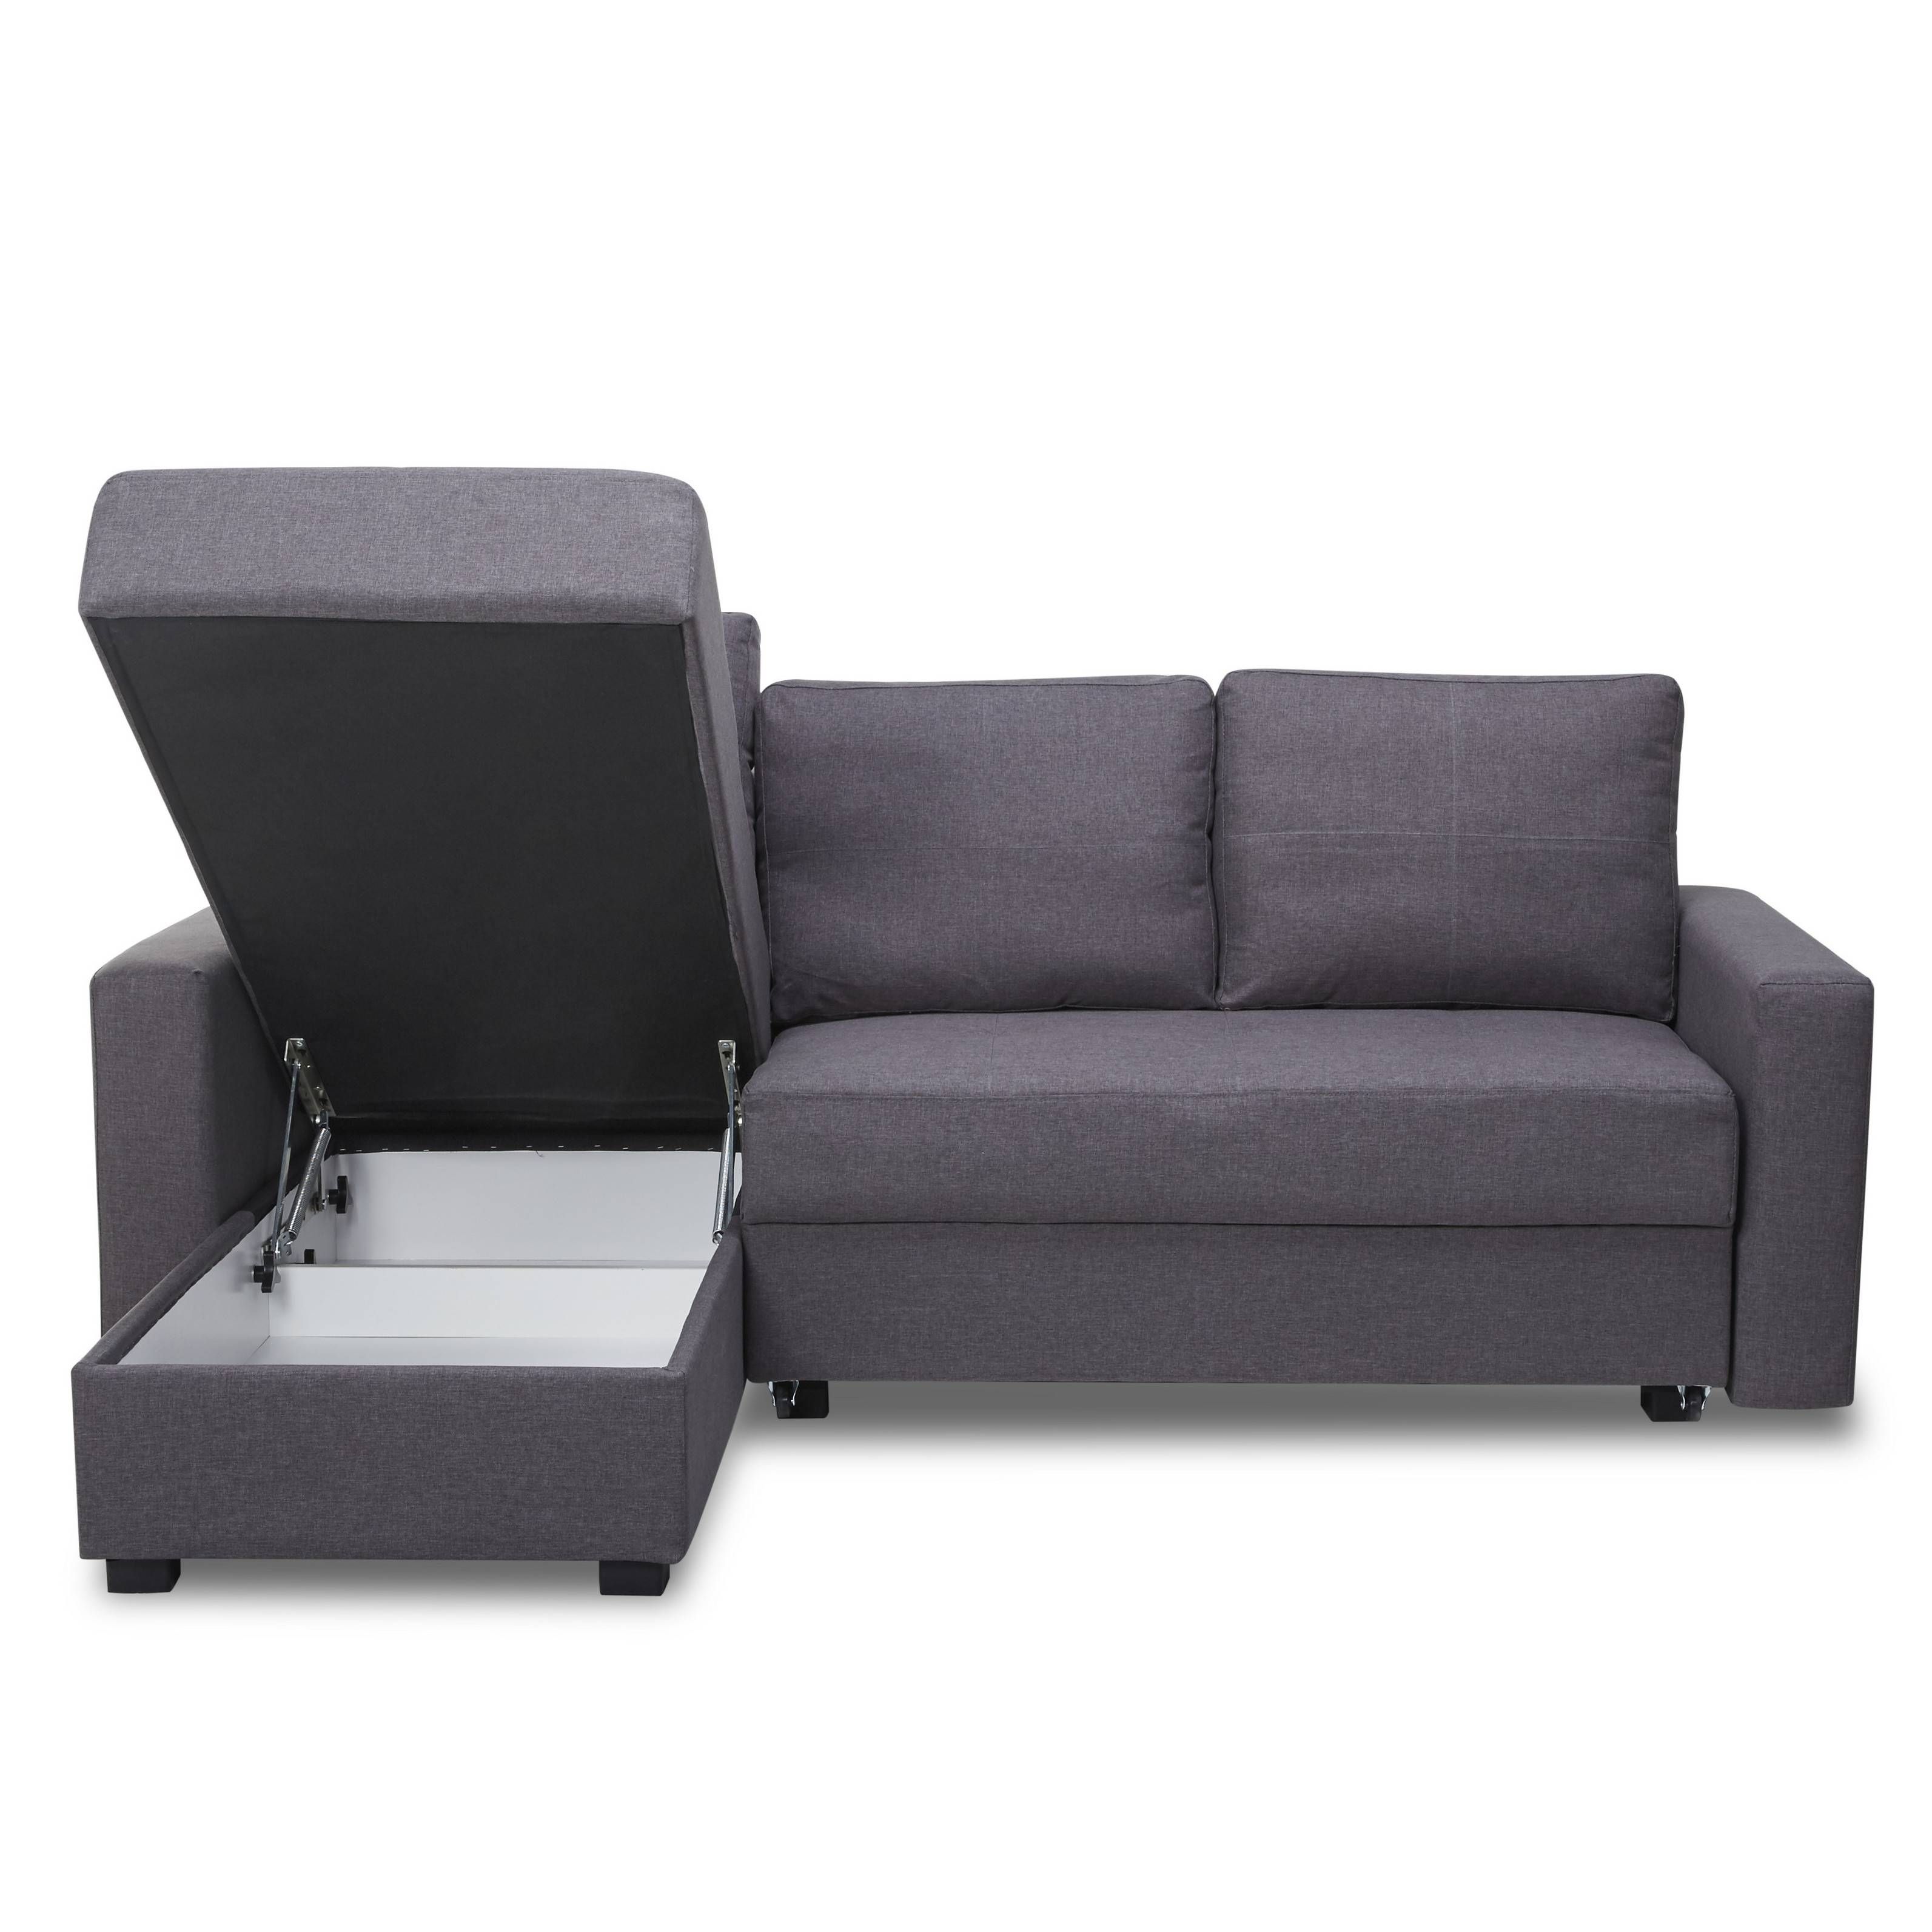 Gianni Sofa Bed With Storage Chaise | Centerfieldbar Throughout Sofa Beds With Storage Chaise (View 10 of 15)